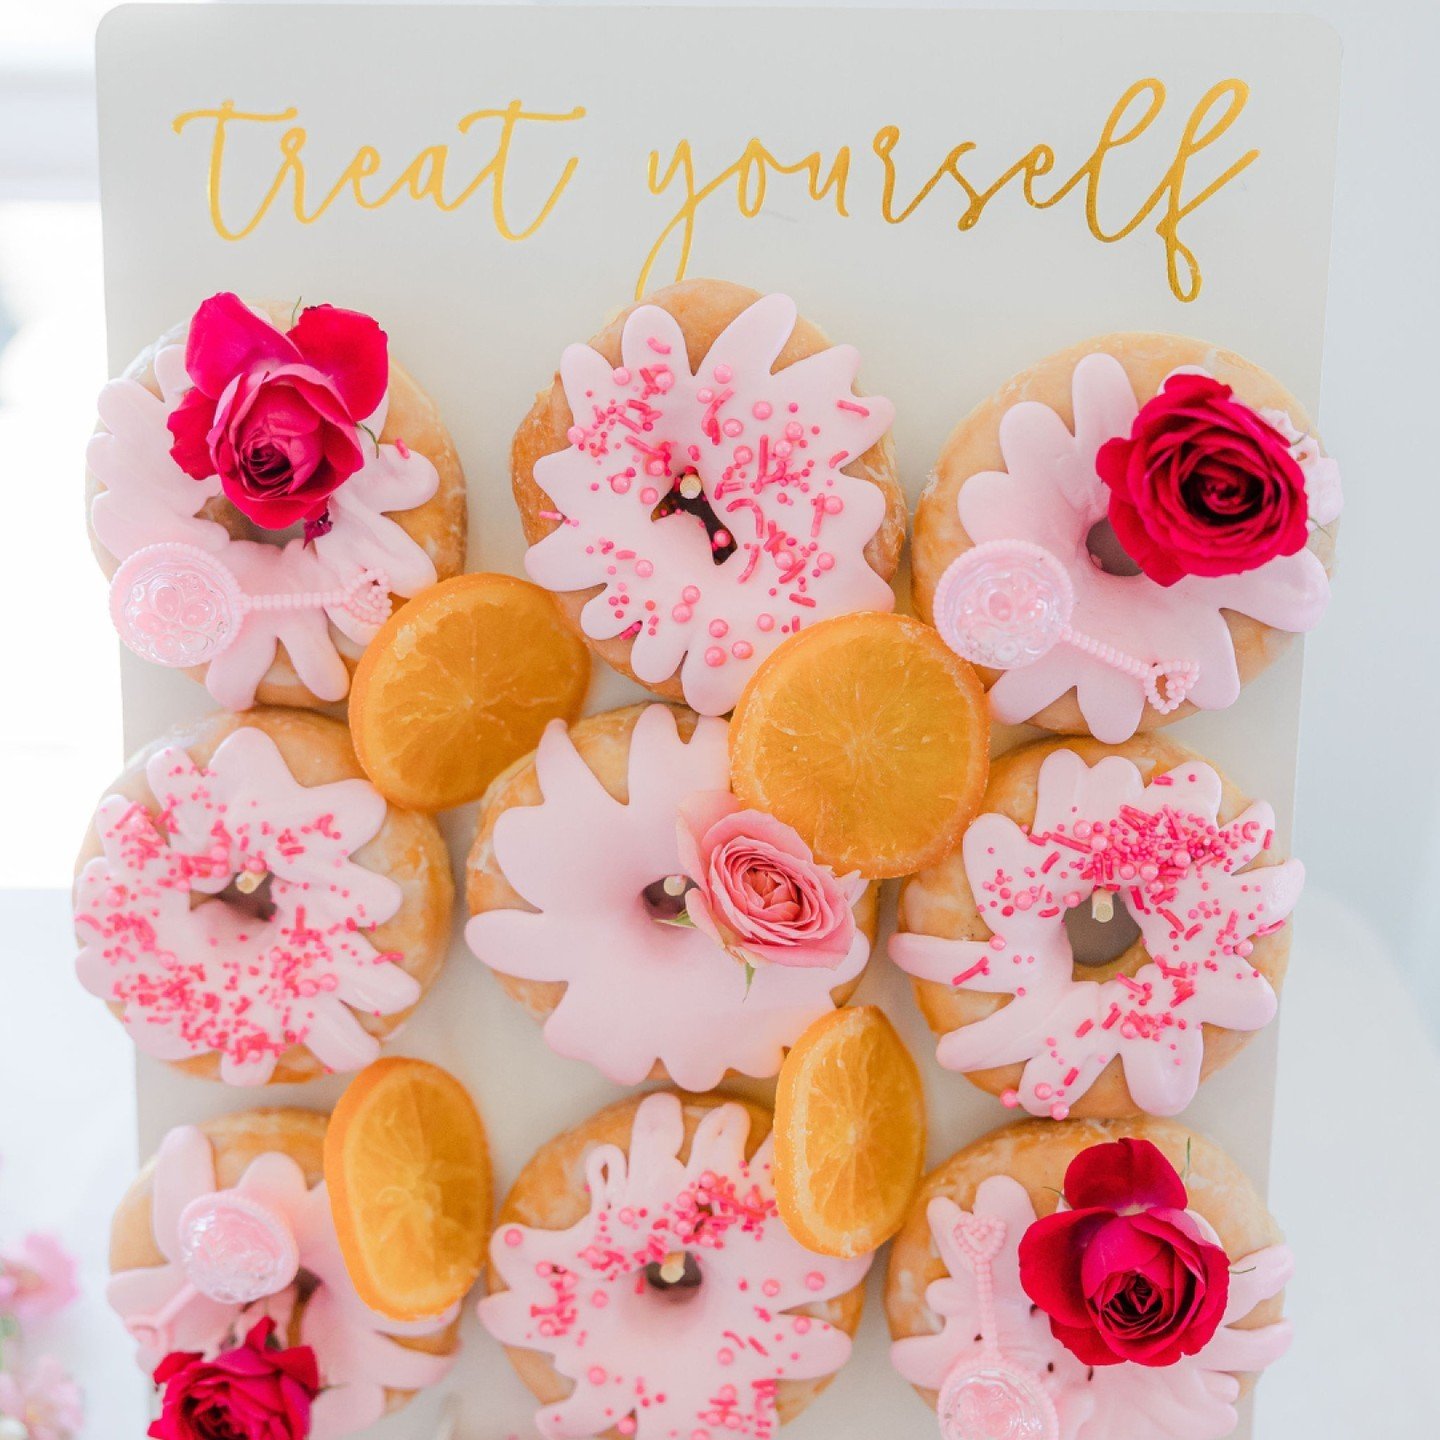 Cheers to love, laughter, and a whole lot of donuts! 

I love adding sweet details to every celebration, and these donuts made this baby shower truly special. Here's to more sweet moments and joyful gatherings!
.
.
.
Venue: @granitelinks
Photography: